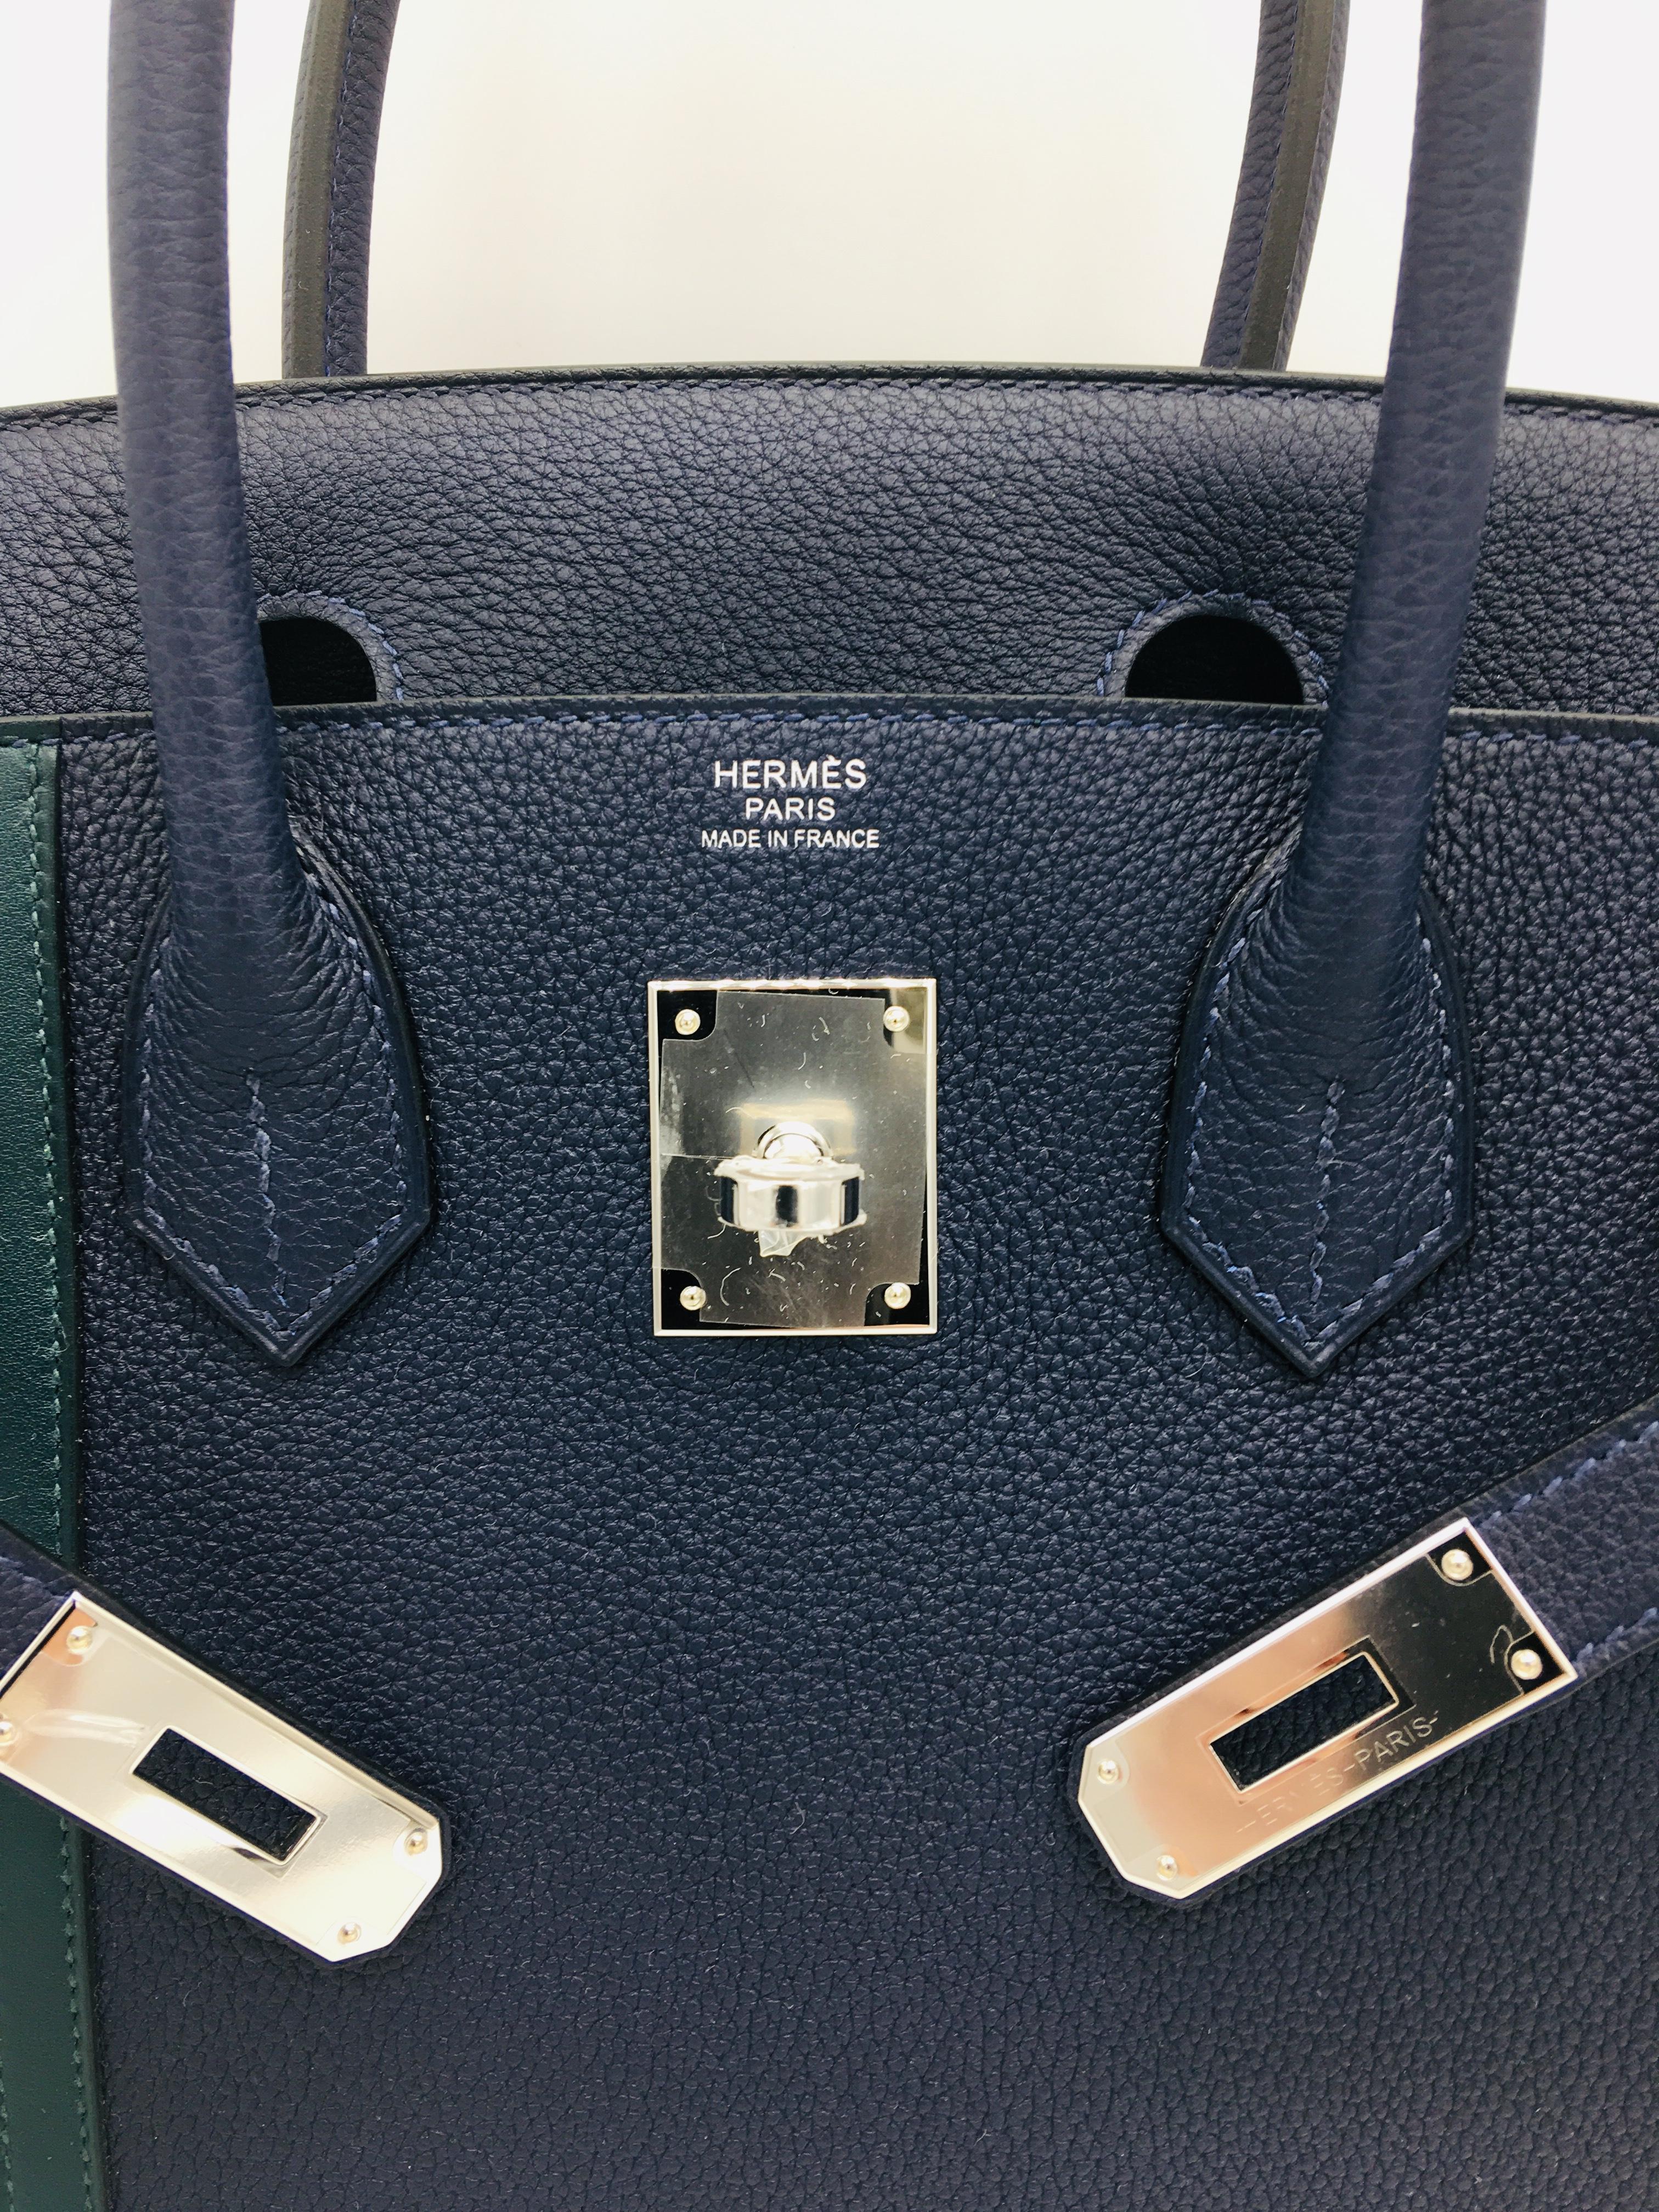 This unusual Birkin Officier in dark Bleu Nuit features two stripes in Vert Cypress to one side of the bag adding a distinctive touch to the classic Birkin.  The main body of the bag is in Togo Leather  with the contrasting stripes in Swift, with